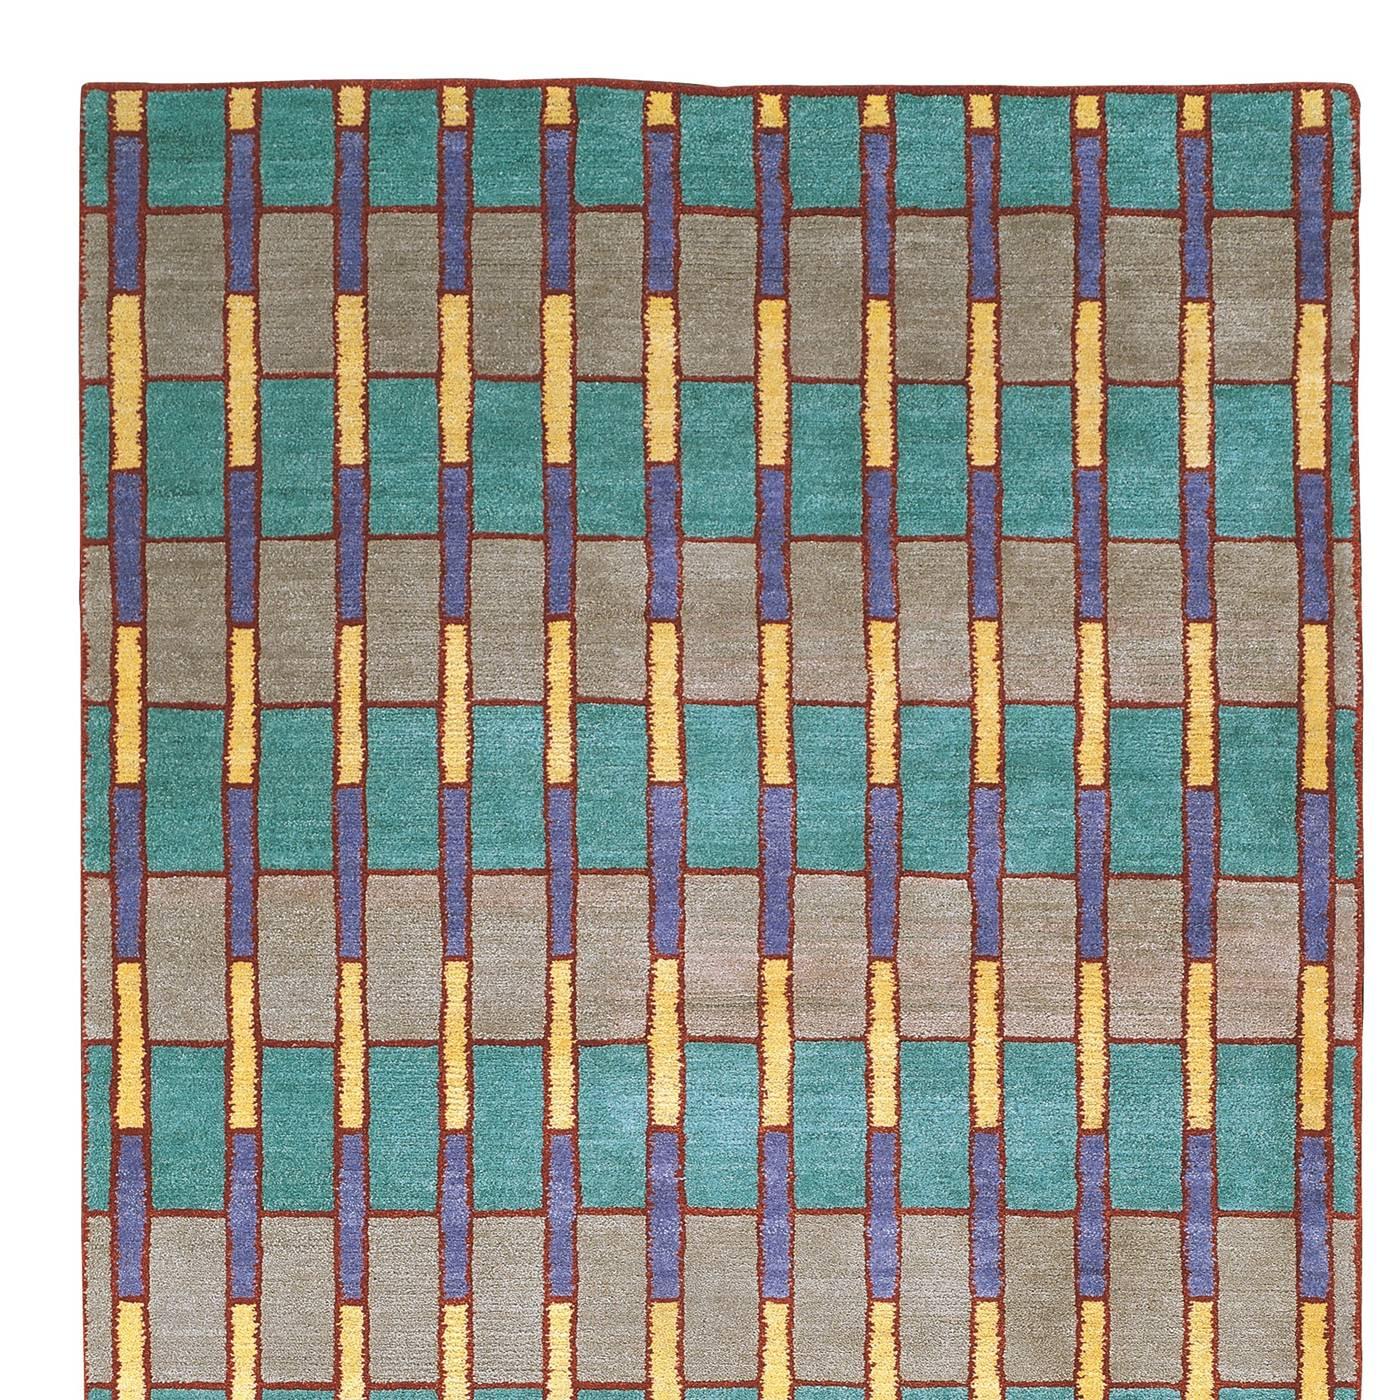 This carpet designed by George J. Sowden is part of a 36-piece series signed by the designer and entirely handmade in Nepal by artisans who still use ancient artisanal methods in working the Tibetan wool, knotting it by hand, dying it by hand, and